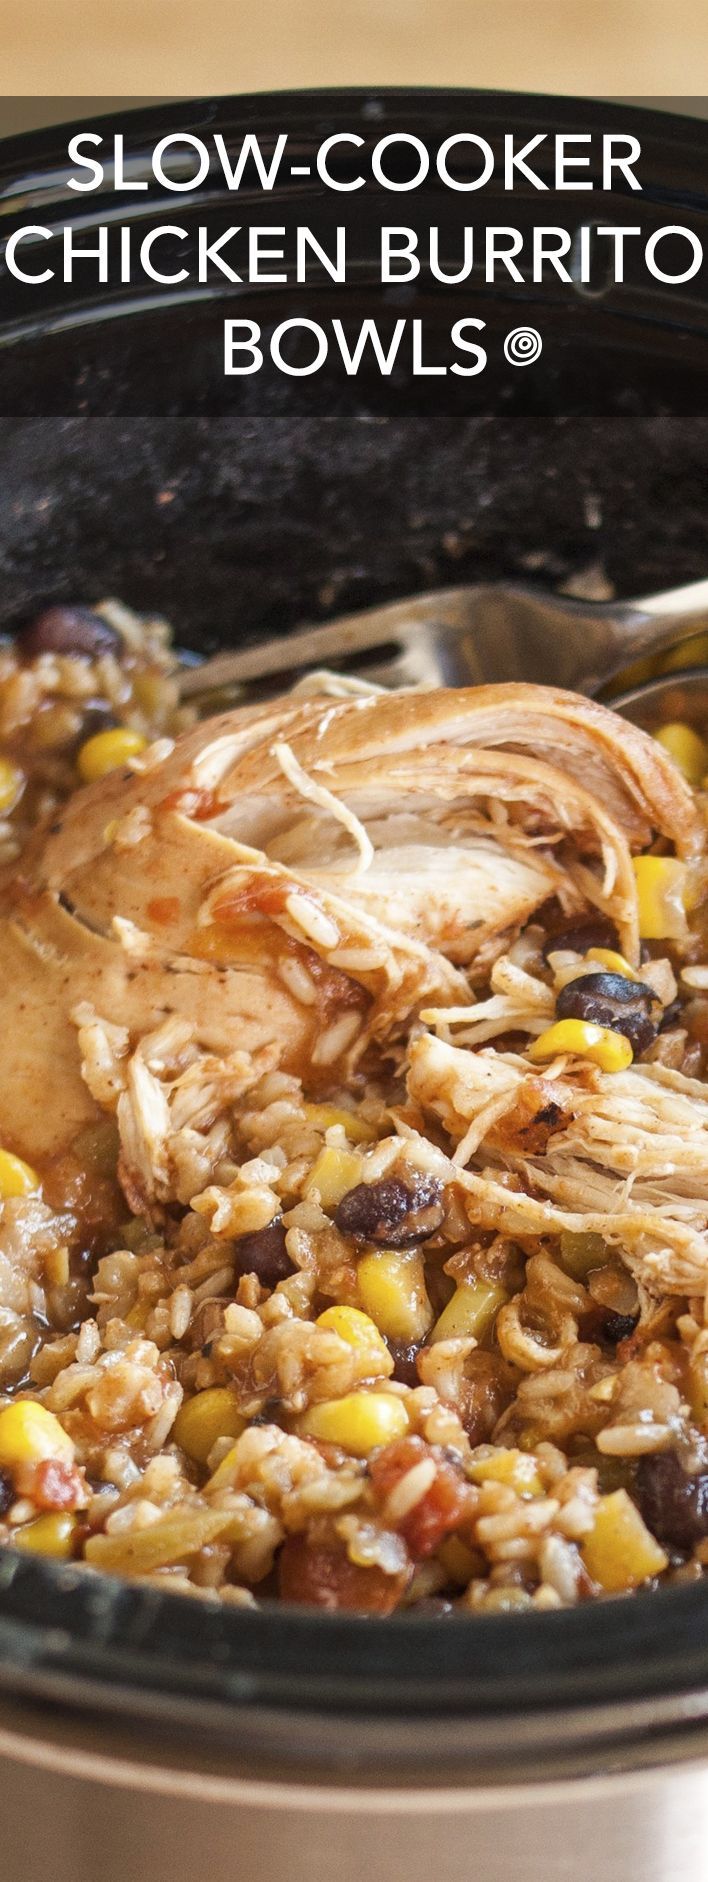 Slow-Cooker Chicken Burrito Bowls Recipe. This EASY crockpot chicken dinner is soo